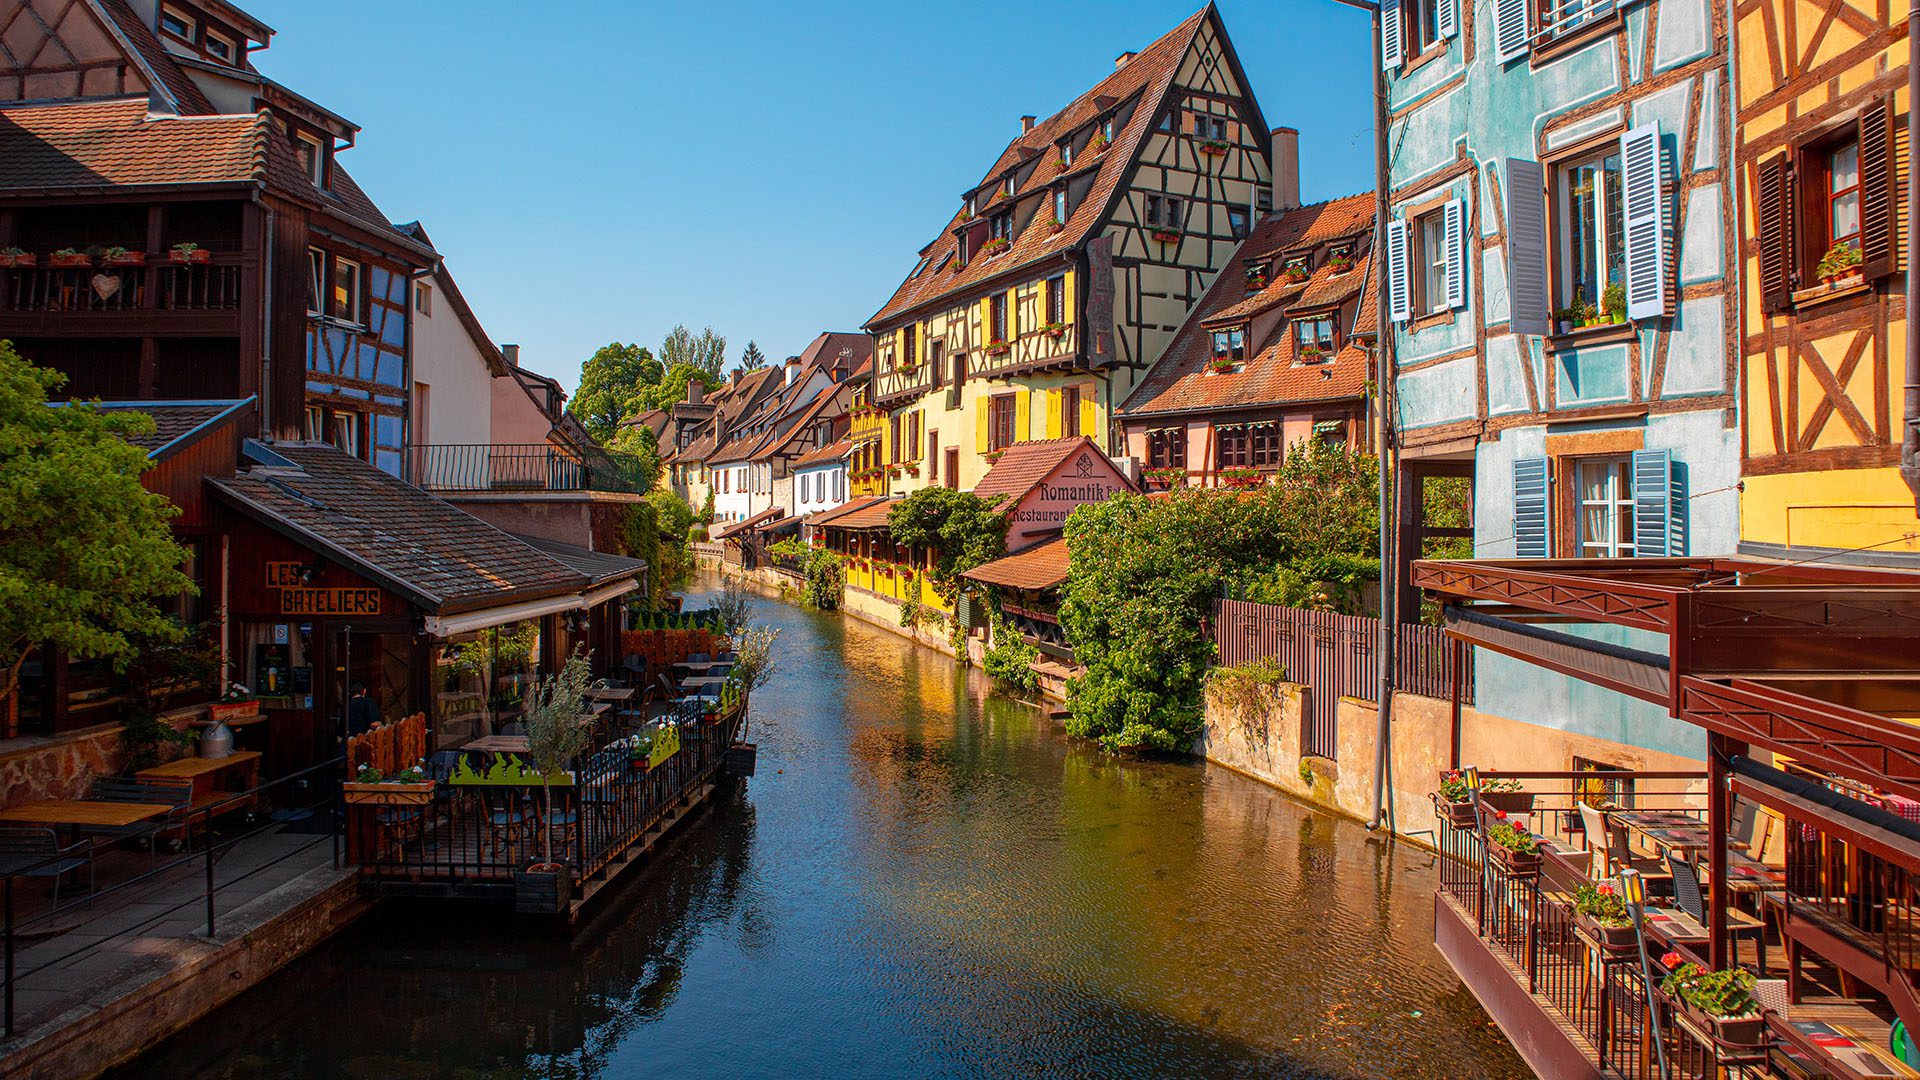 Strasbourg, France, image by Photo by chan lee on Unsplash